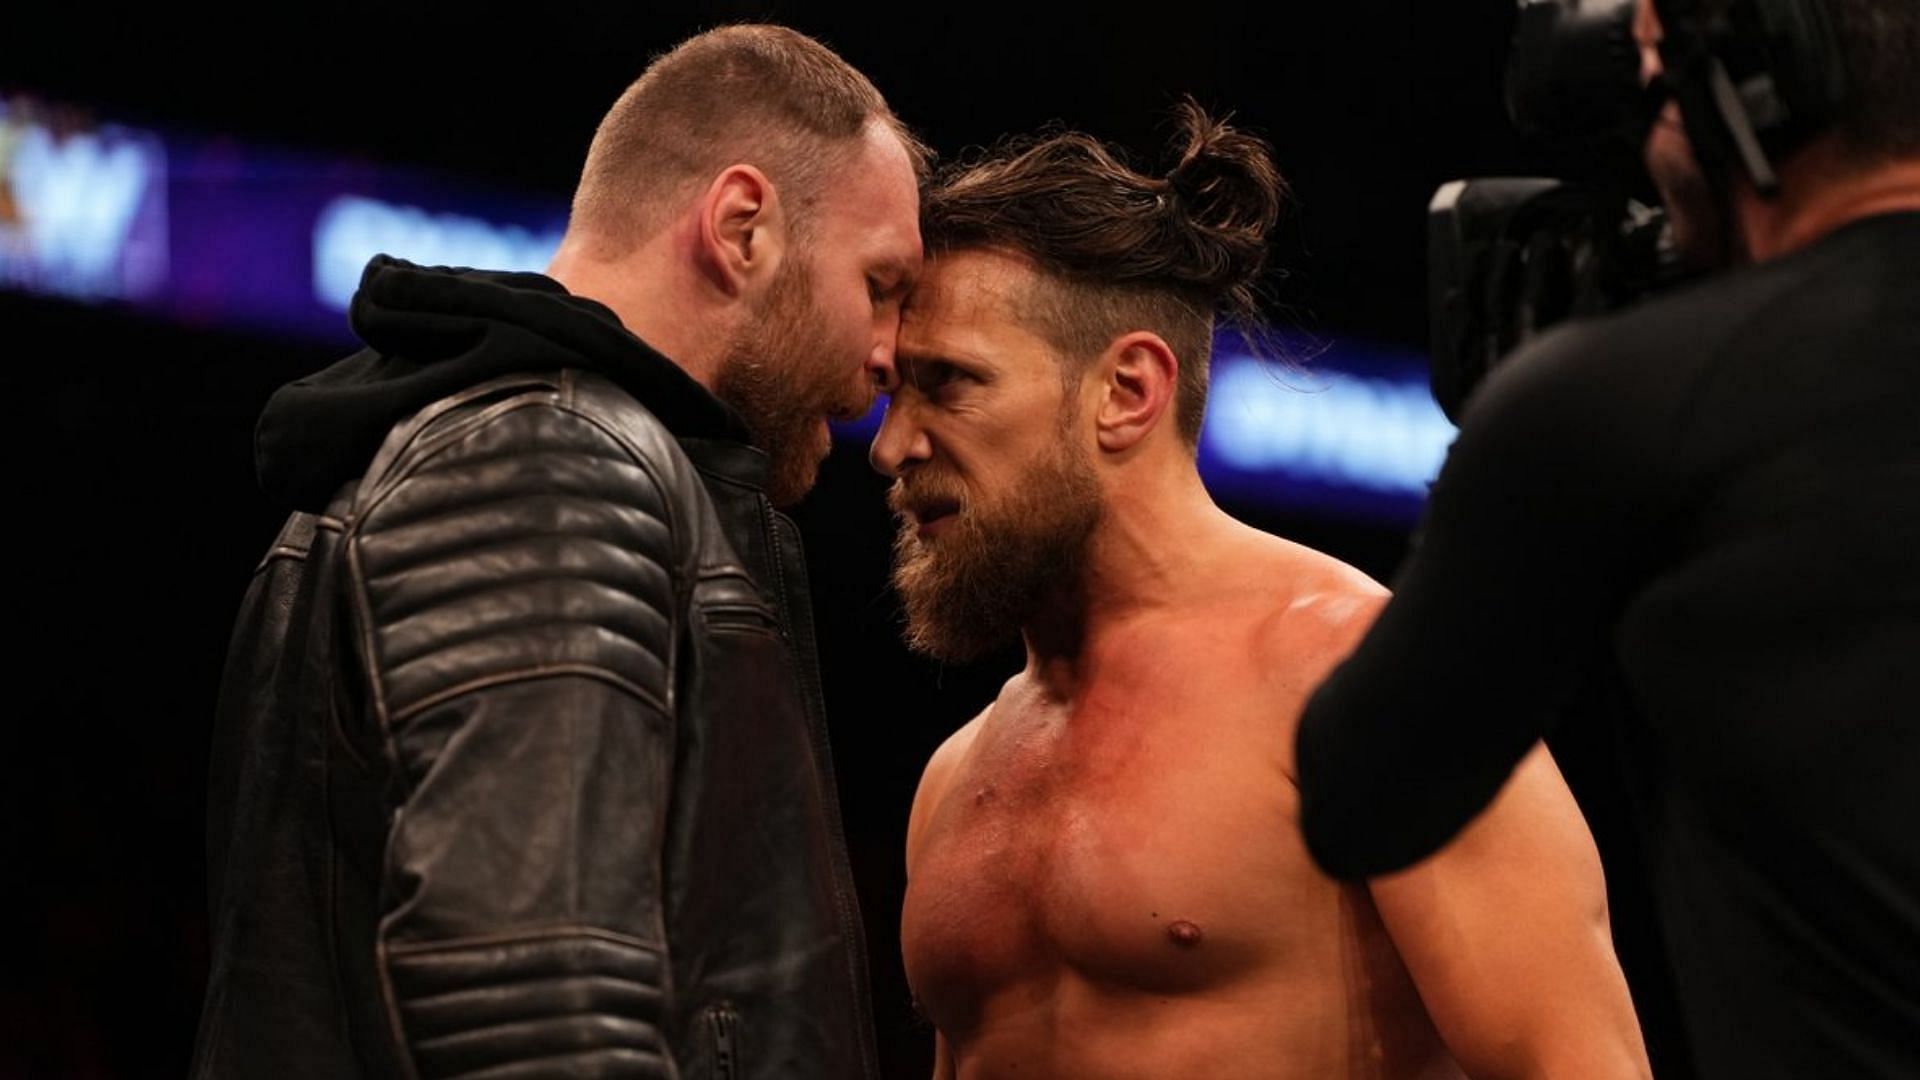 Moxley and Danielson had an interesting finish to their brutal outing at AEW Revolution.